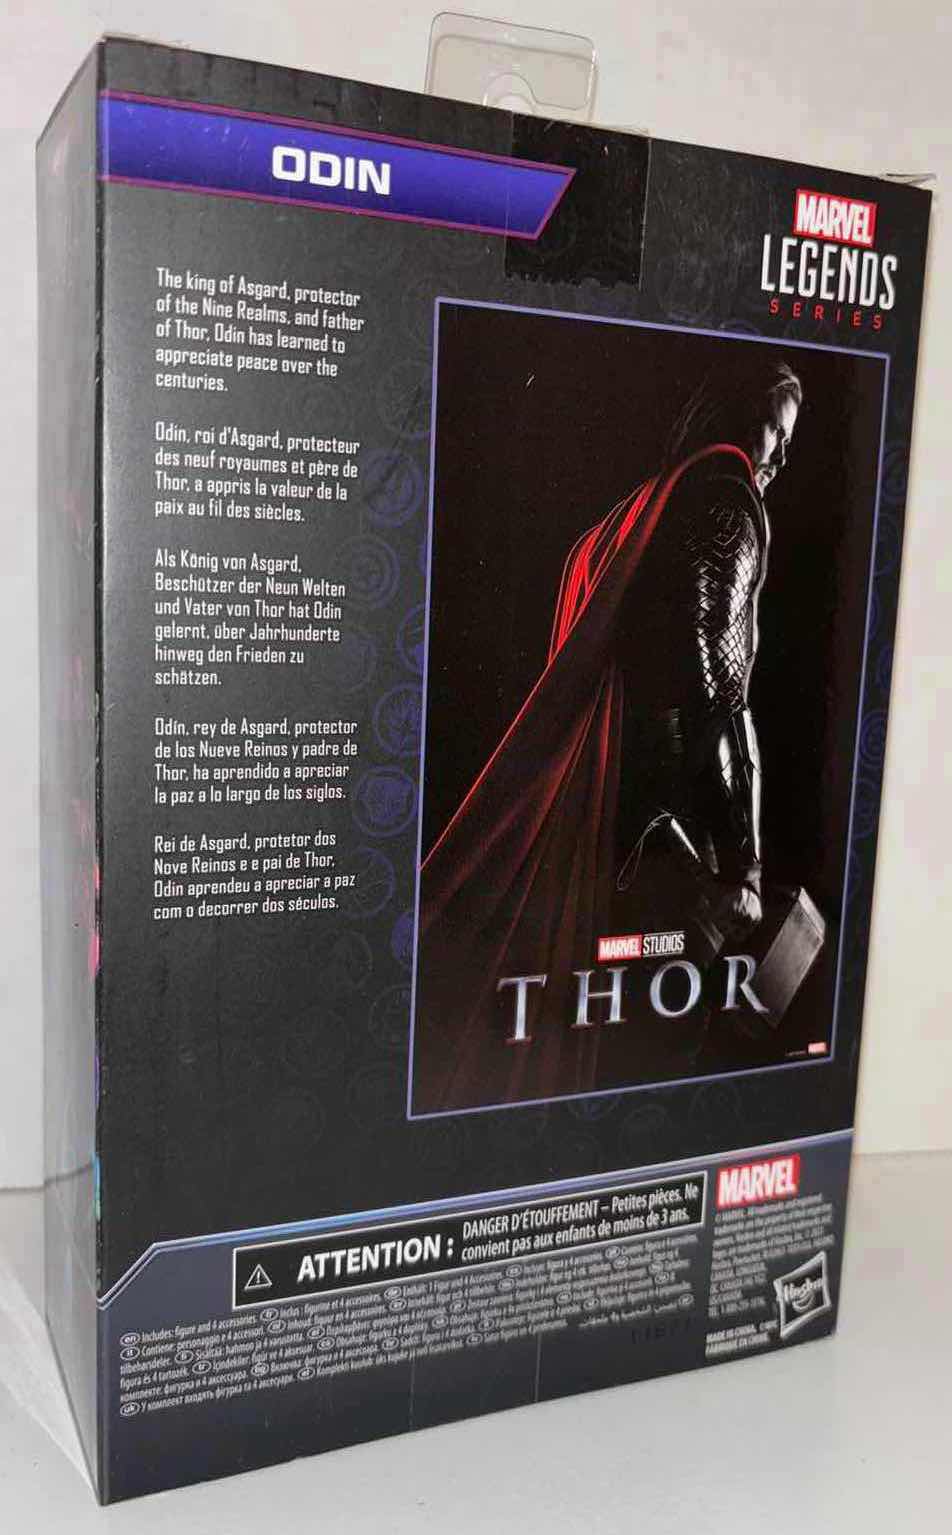 Photo 3 of NEW MARVEL STUDIOS THOR LEGENDS SERIES ACTION FIGURE & ACCESSORIES, THE INFINITY SAGA “ODIN” (1)